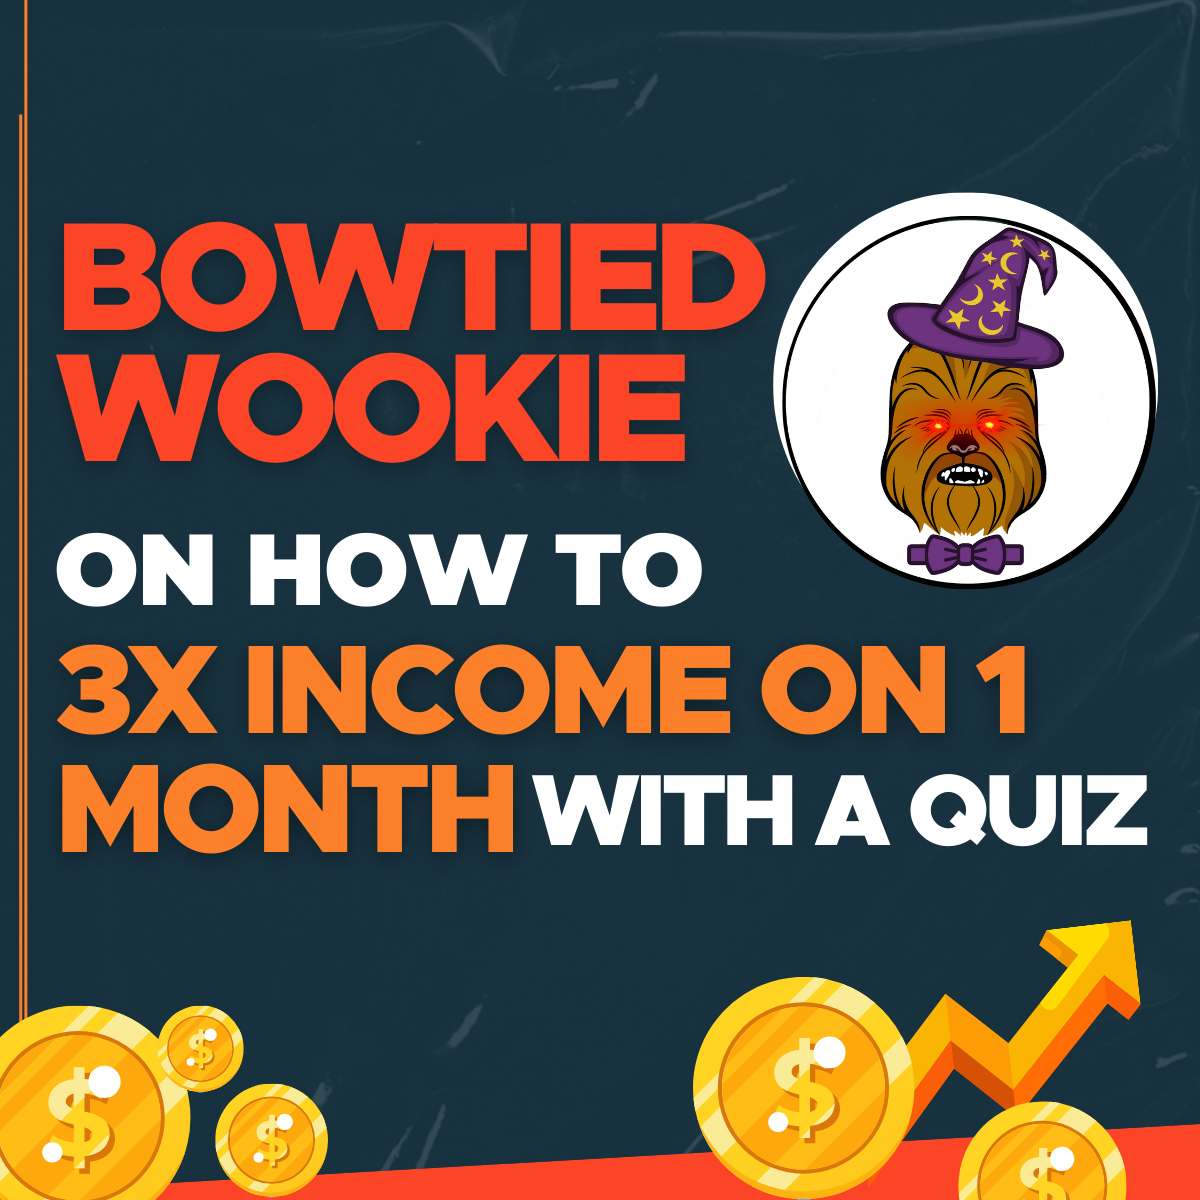 BowTiedWookie on how to 3x income on 1 month with a quiz